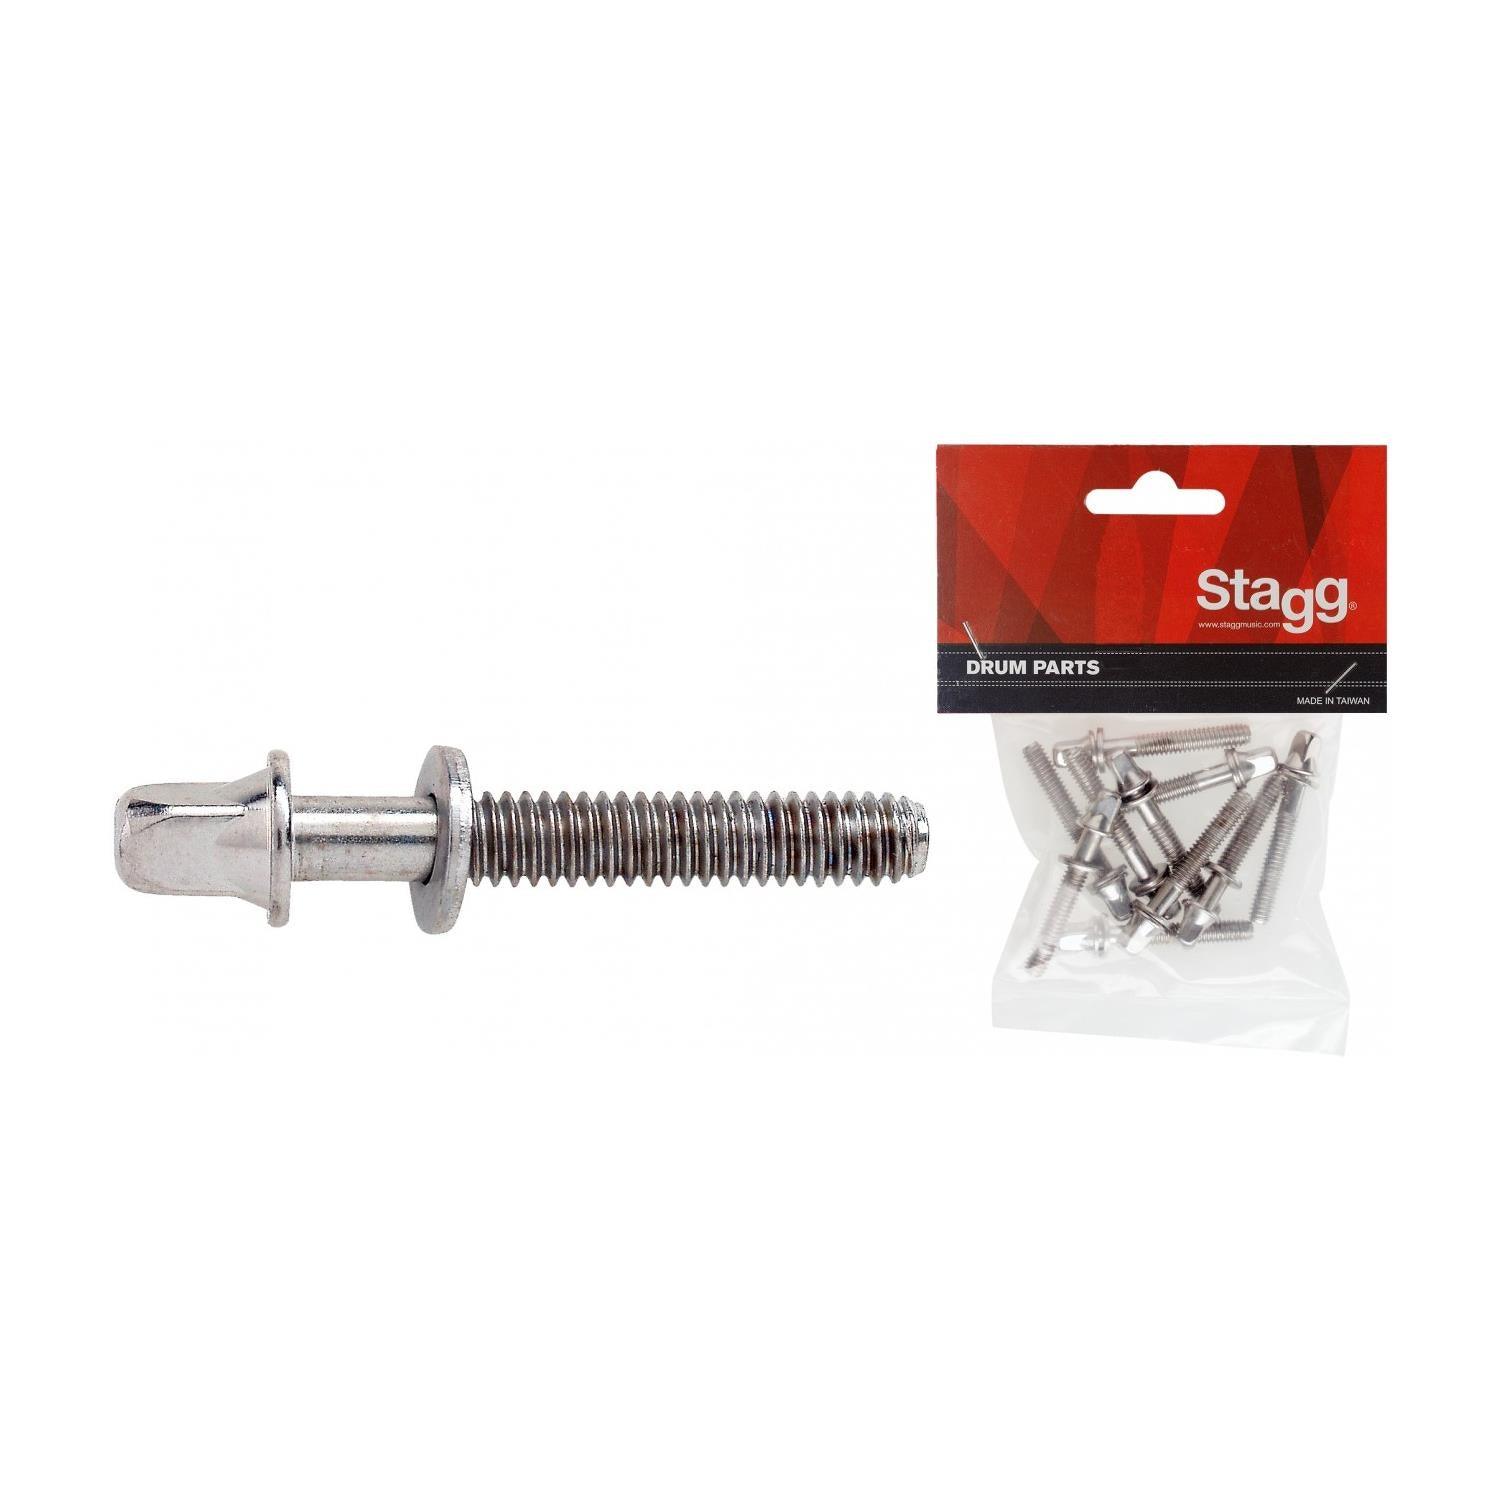 Stagg 4H-HP 32mm Tension Bolts 10 Pack - DY Pro Audio